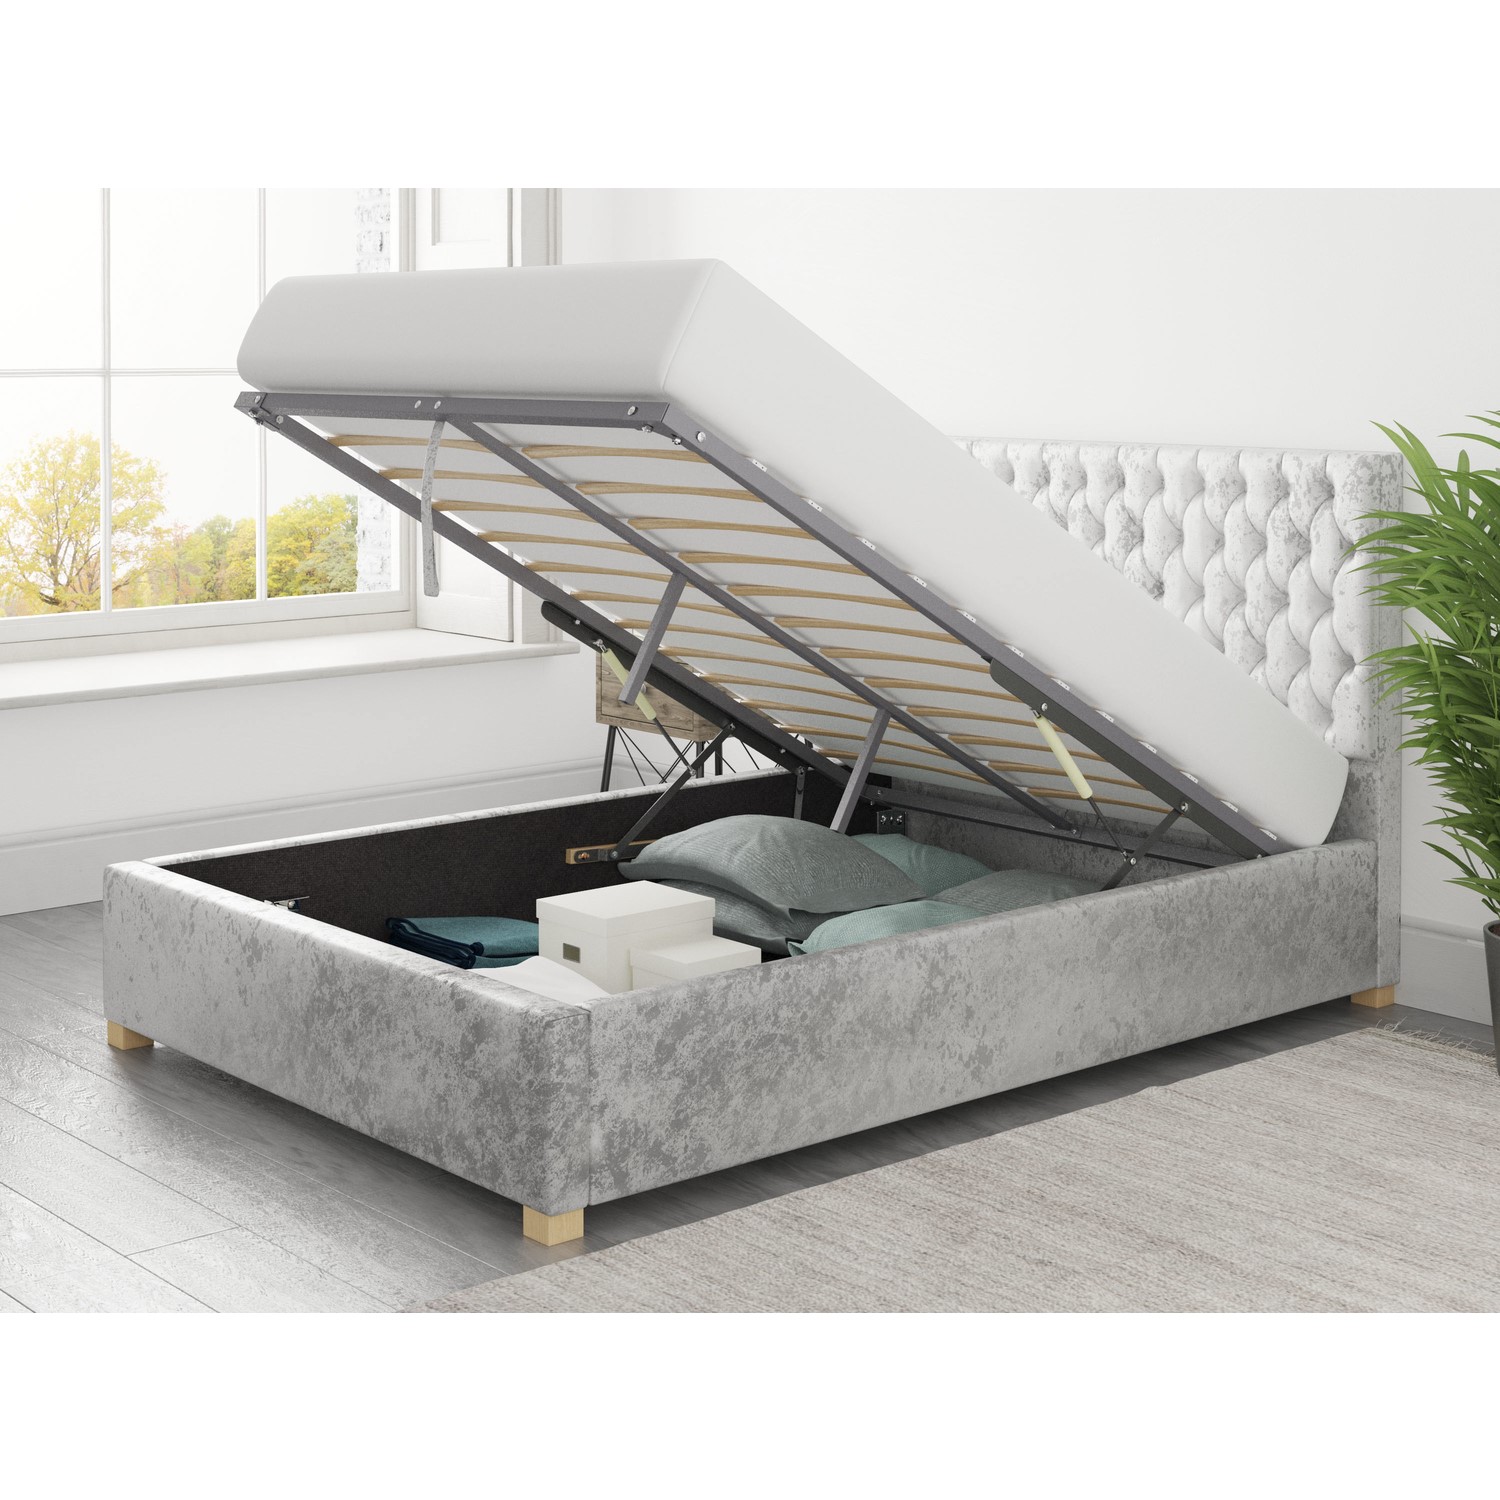 Read more about Silver crushed velvet king size ottoman bed angel aspire